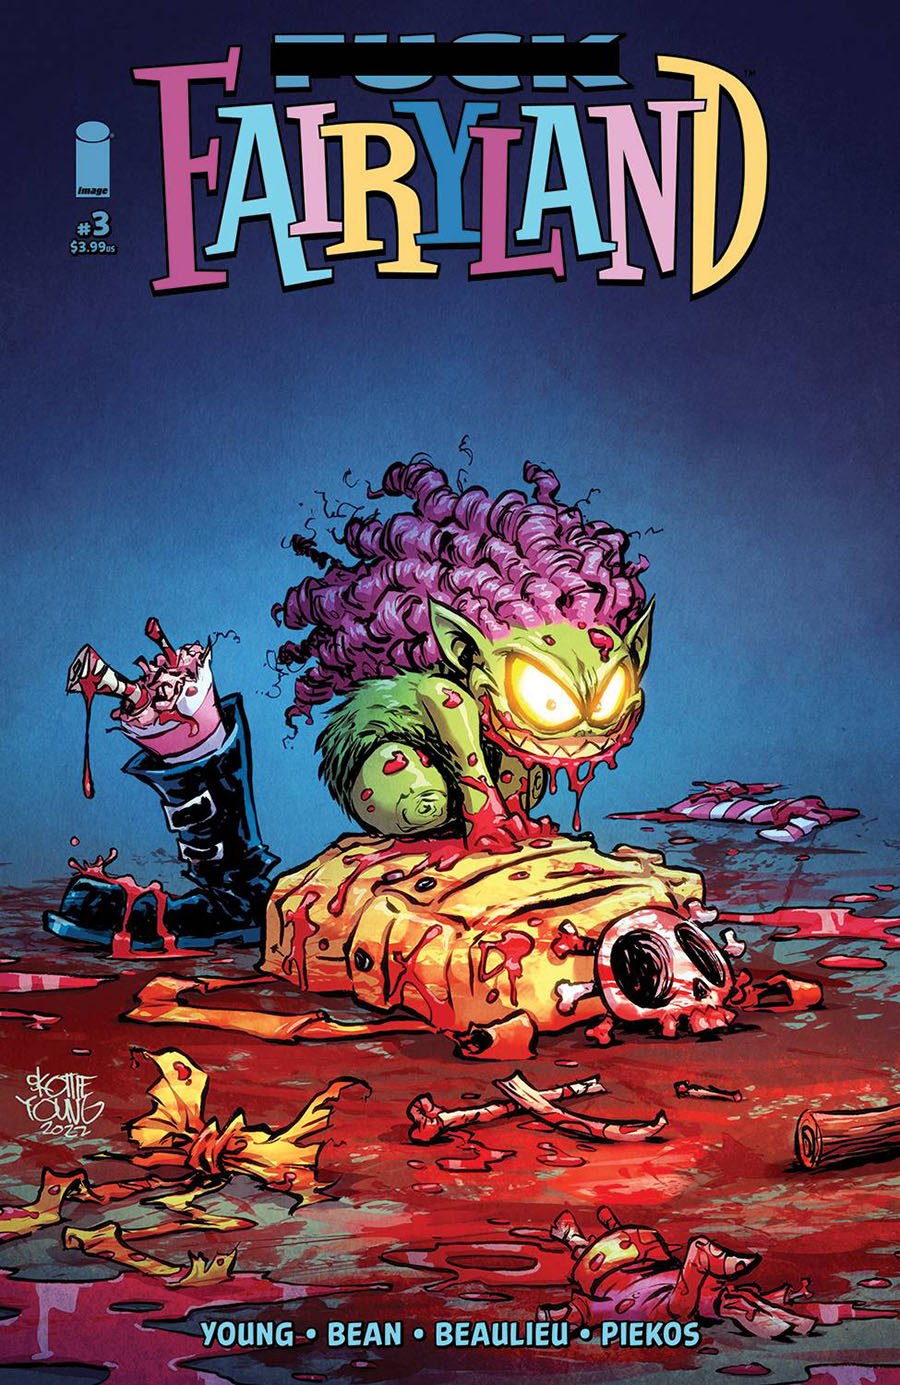 I Hate Fairyland Vol 2 #3 Cover B Variant Skottie Young Cover